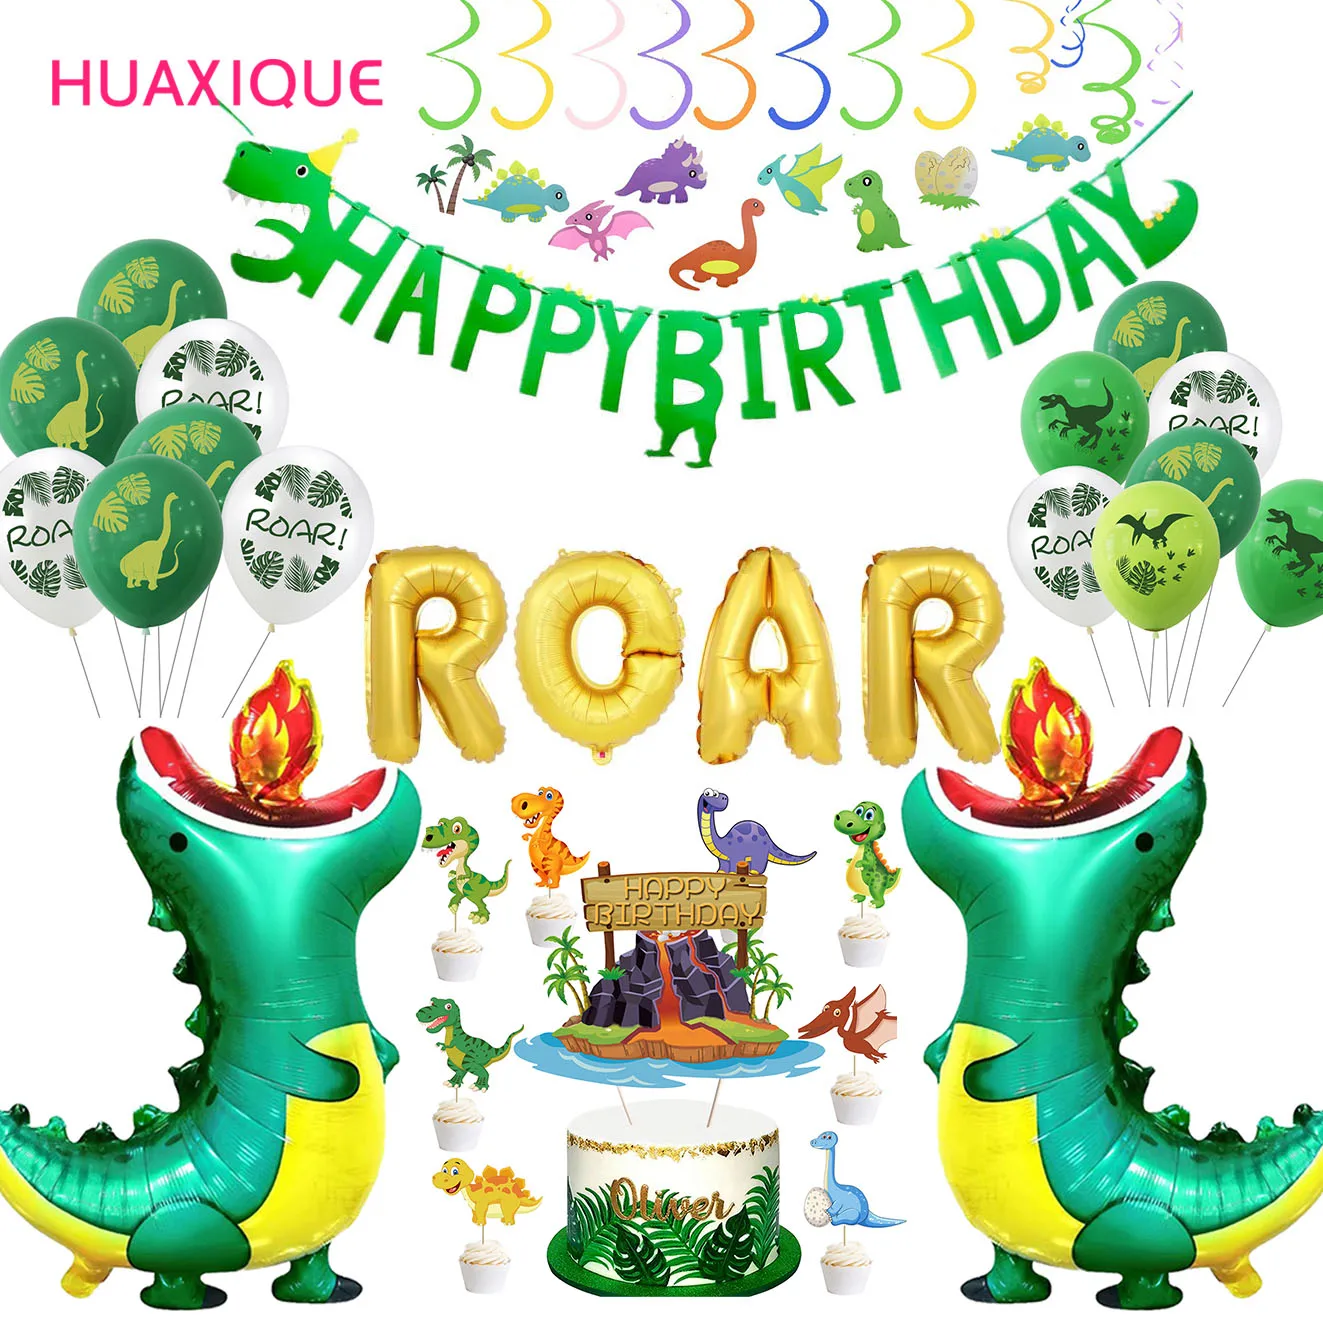 Dinosaur Party Decorations Dragon Balloons Cake Topper  Birthday Banner Jungle Birthday Party Decor Supplies Kids Favors